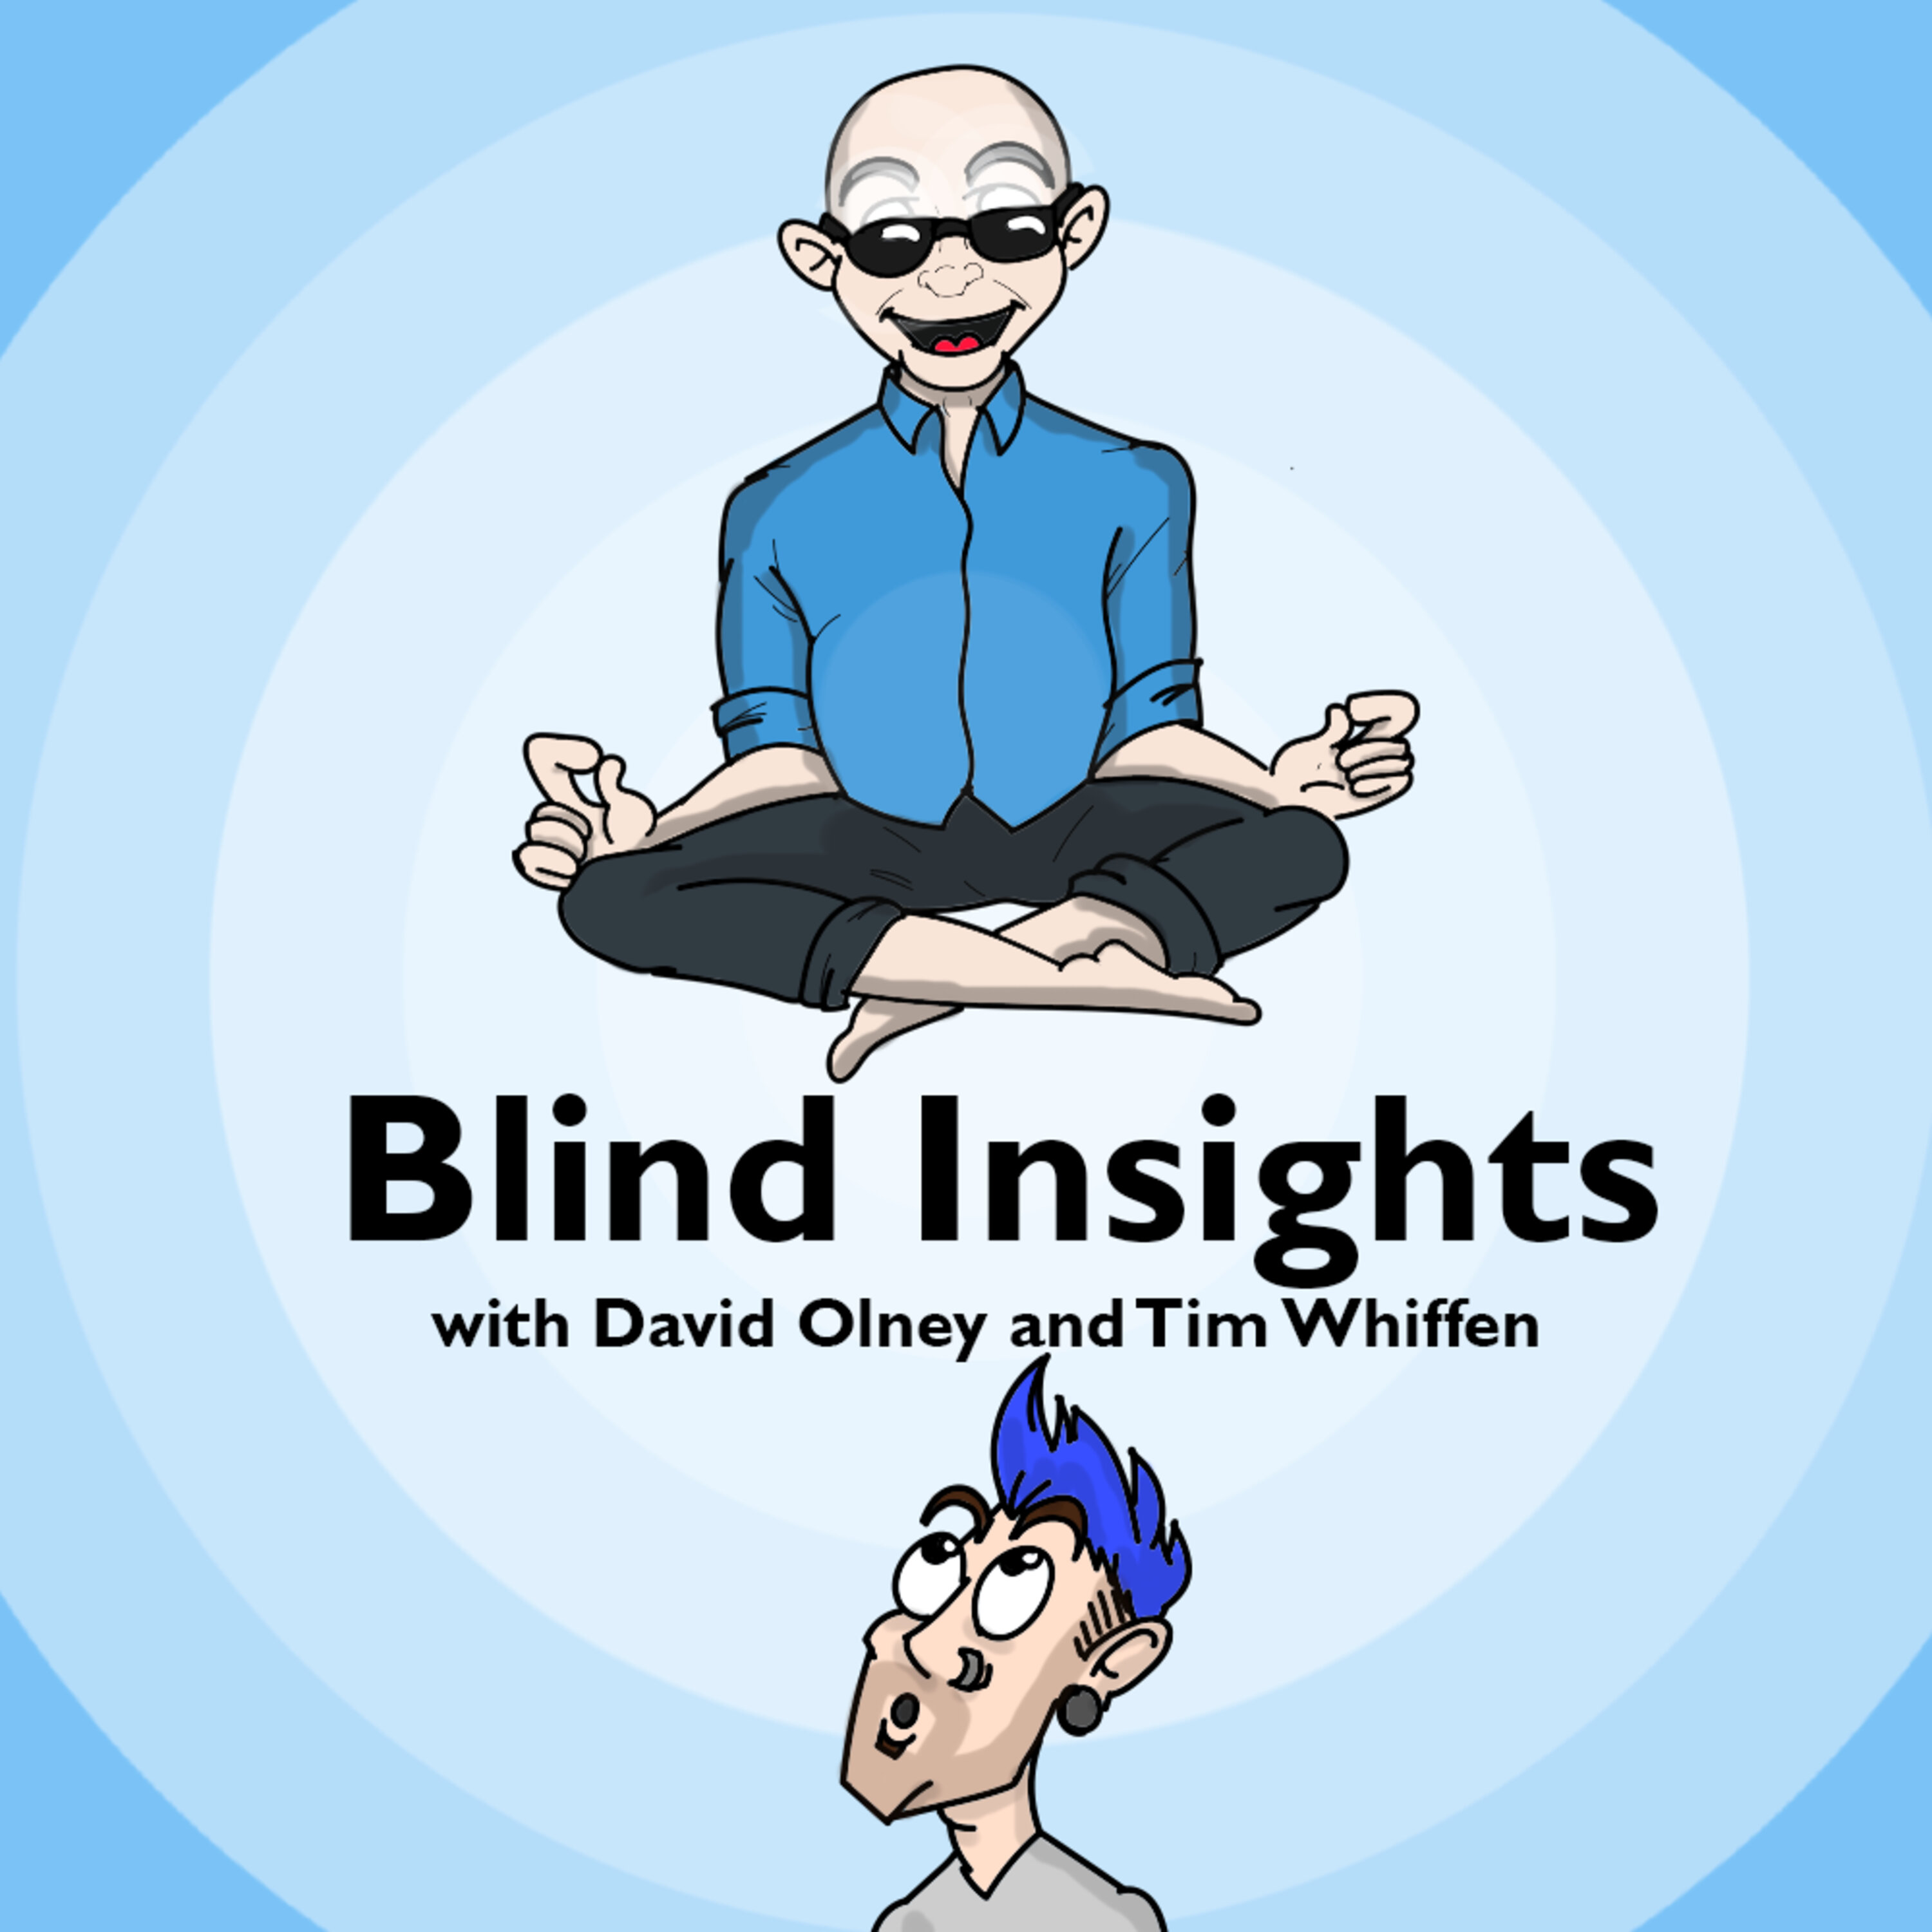 Blind Insights - Is there a 